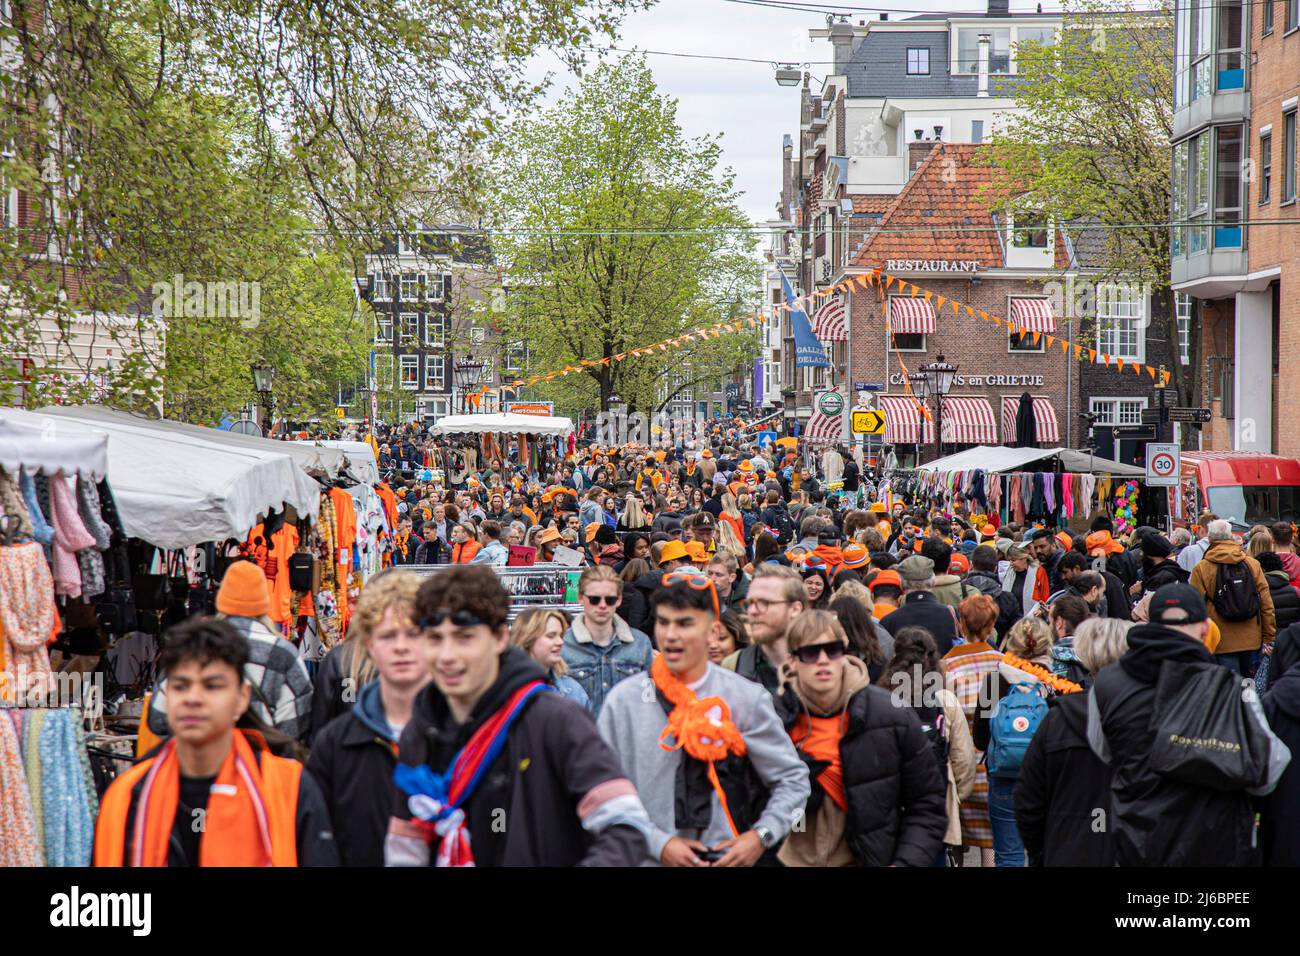 April 27, 2022, Amsterdam, Netherlands: Crowds of people seen on the Streets of Amsterdam during the King's Day celebration. King's Day known as Koningsdag is an orange filled celebration for the king's birthday, a national holiday full of events across the country. Thousands of local revellers and tourists visited Amsterdam to celebrate and party around the canals while wearing orange clothes and the boats doing a parade in the water canals. (Credit Image: © Nik Oiko/SOPA Images via ZUMA Press Wire) Stock Photo